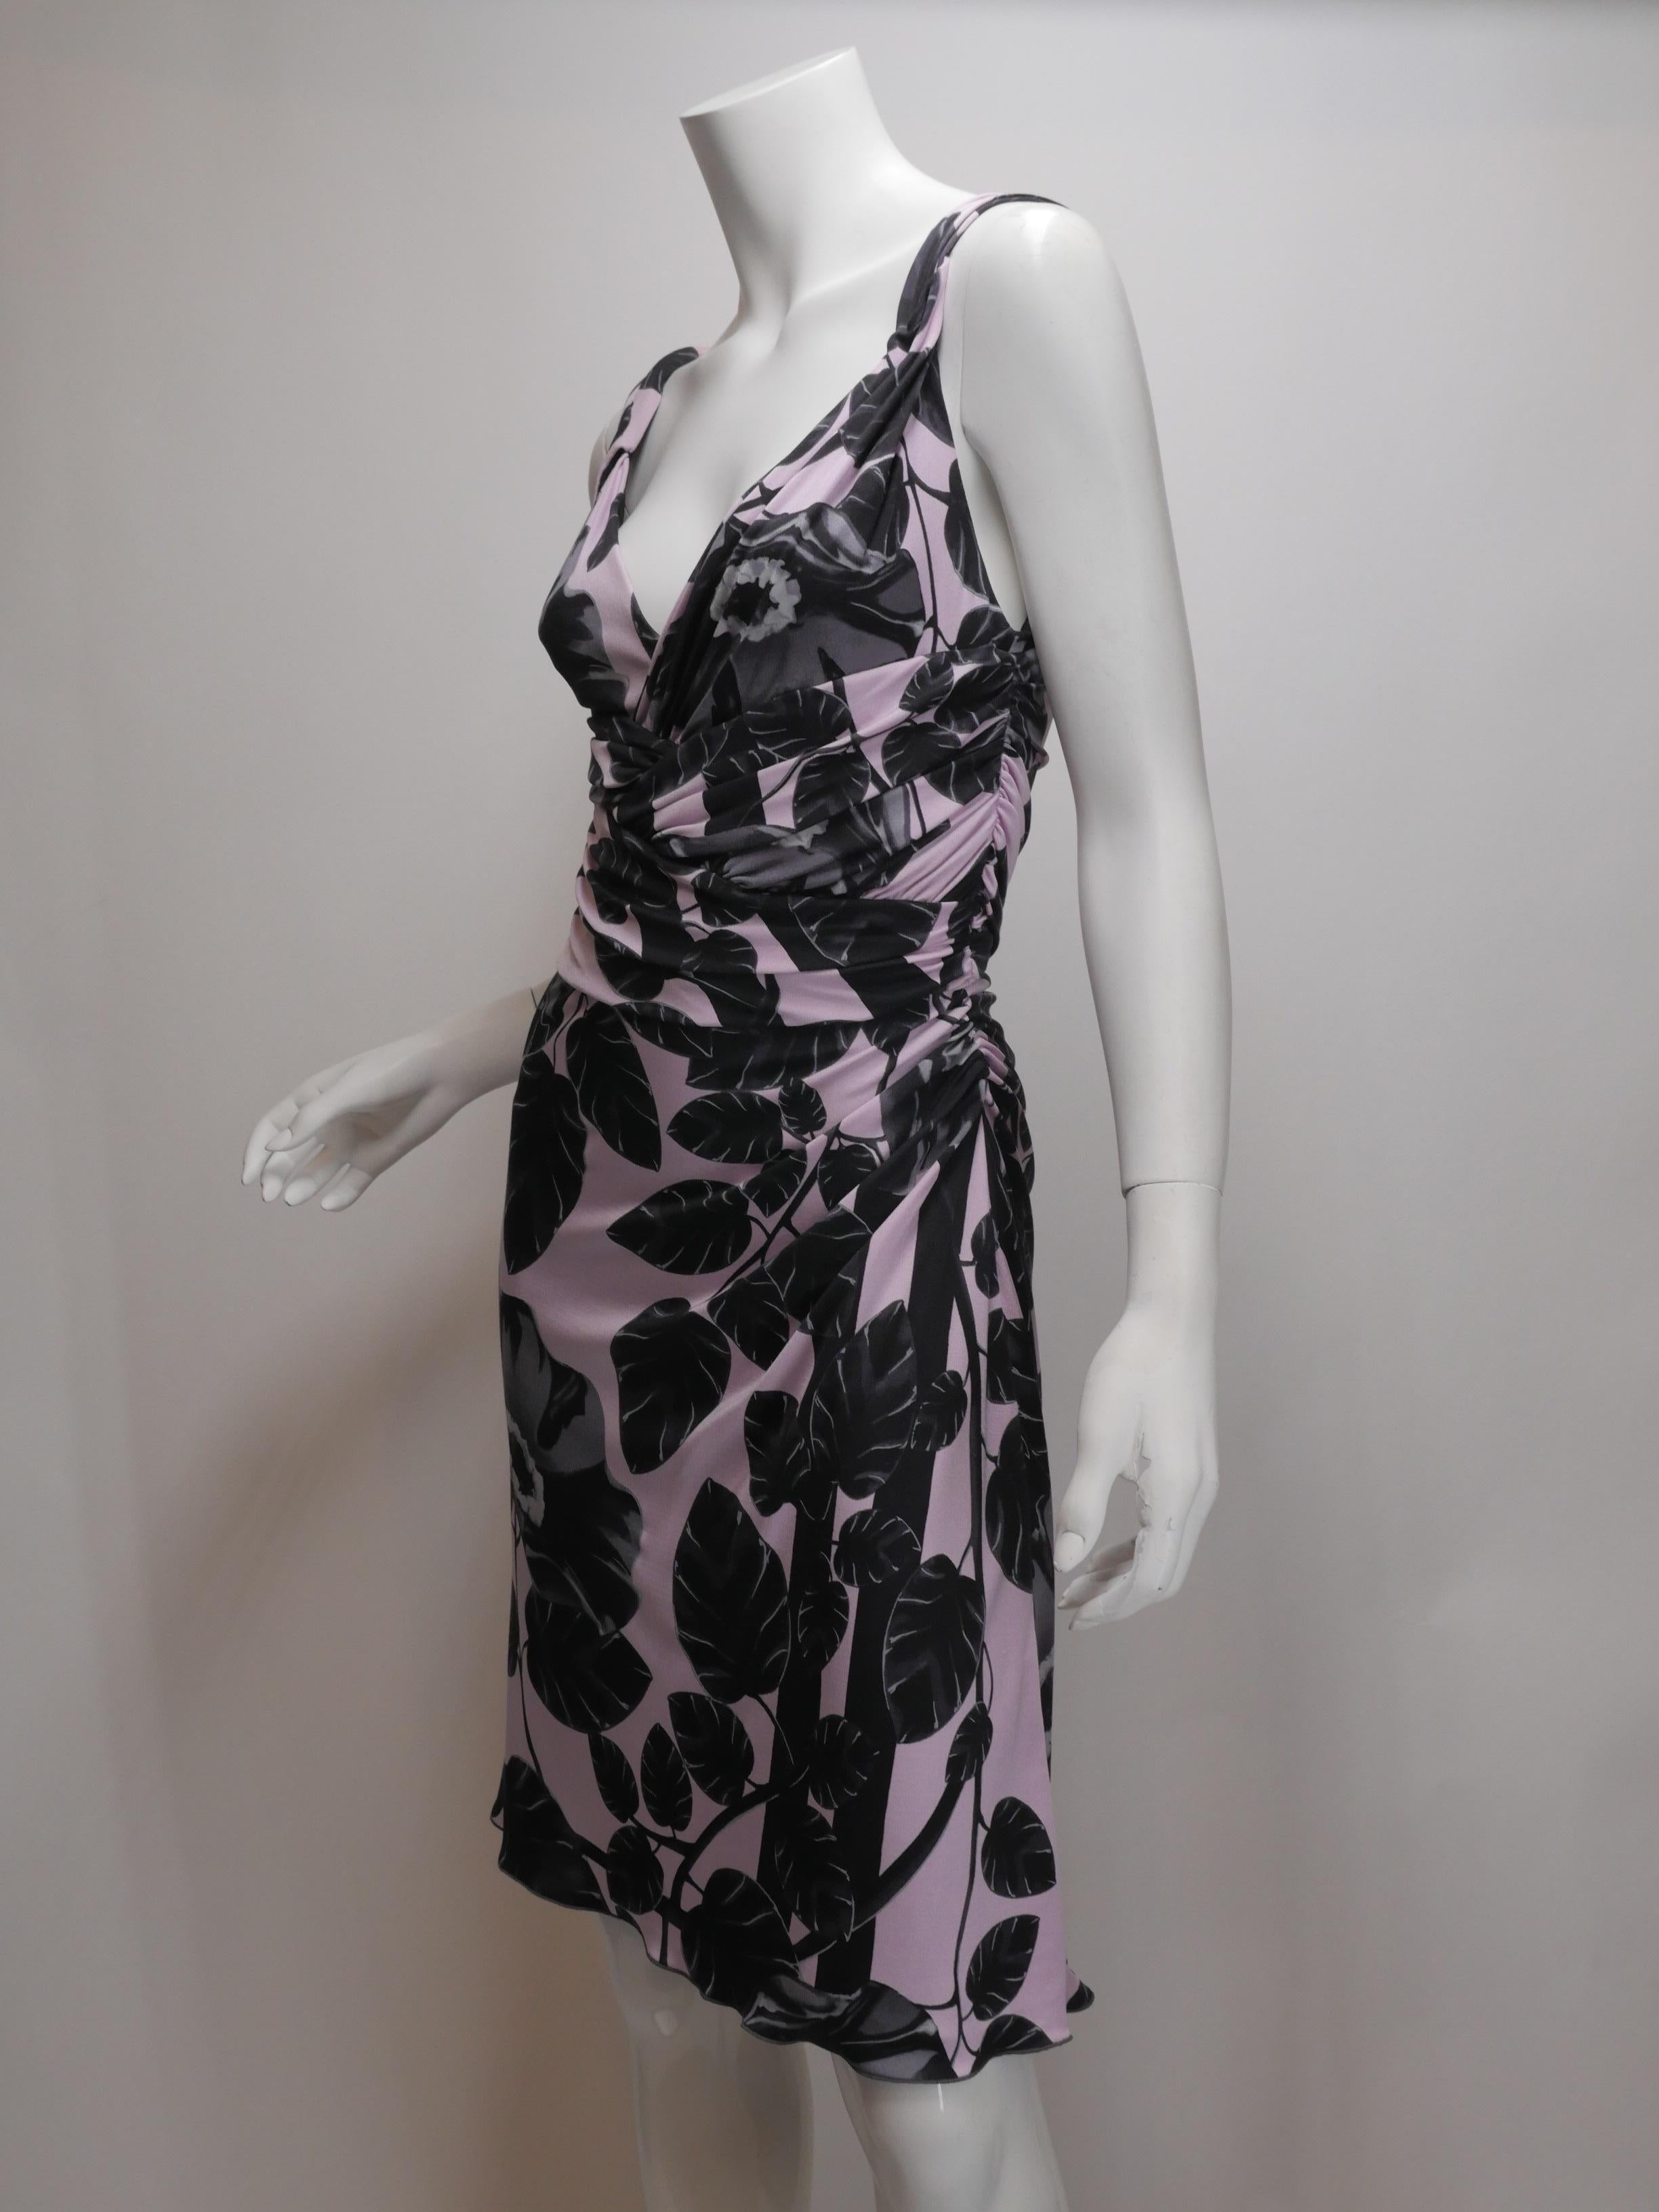 Women's or Men's Versace Size 44 Silk Lavender and Black Floral Printed Dress